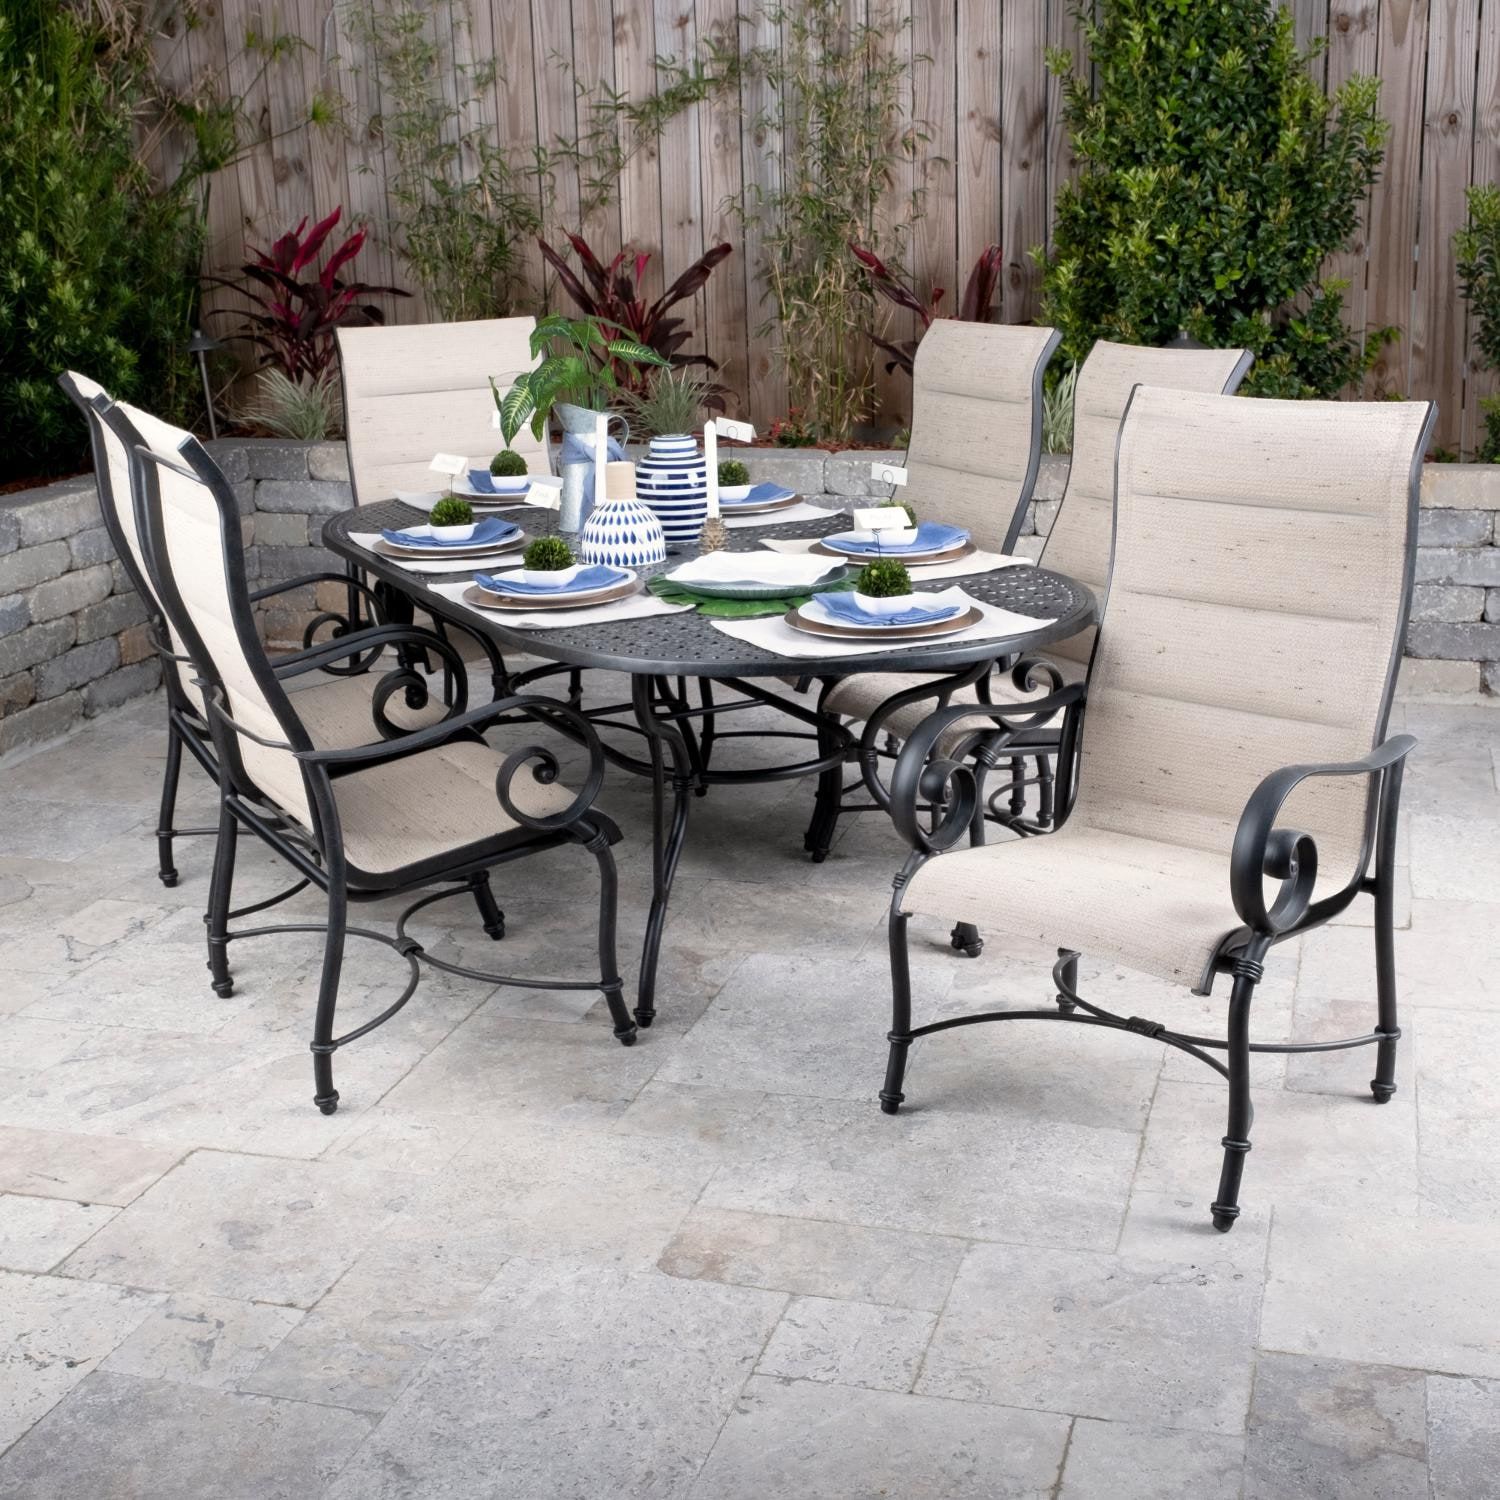 Elysian 7 Piece Padded Sunbrella Sling Patio Dining Set W/ 84 X 42 Inch Throughout Oval 7 Piece Outdoor Patio Dining Sets (View 7 of 15)